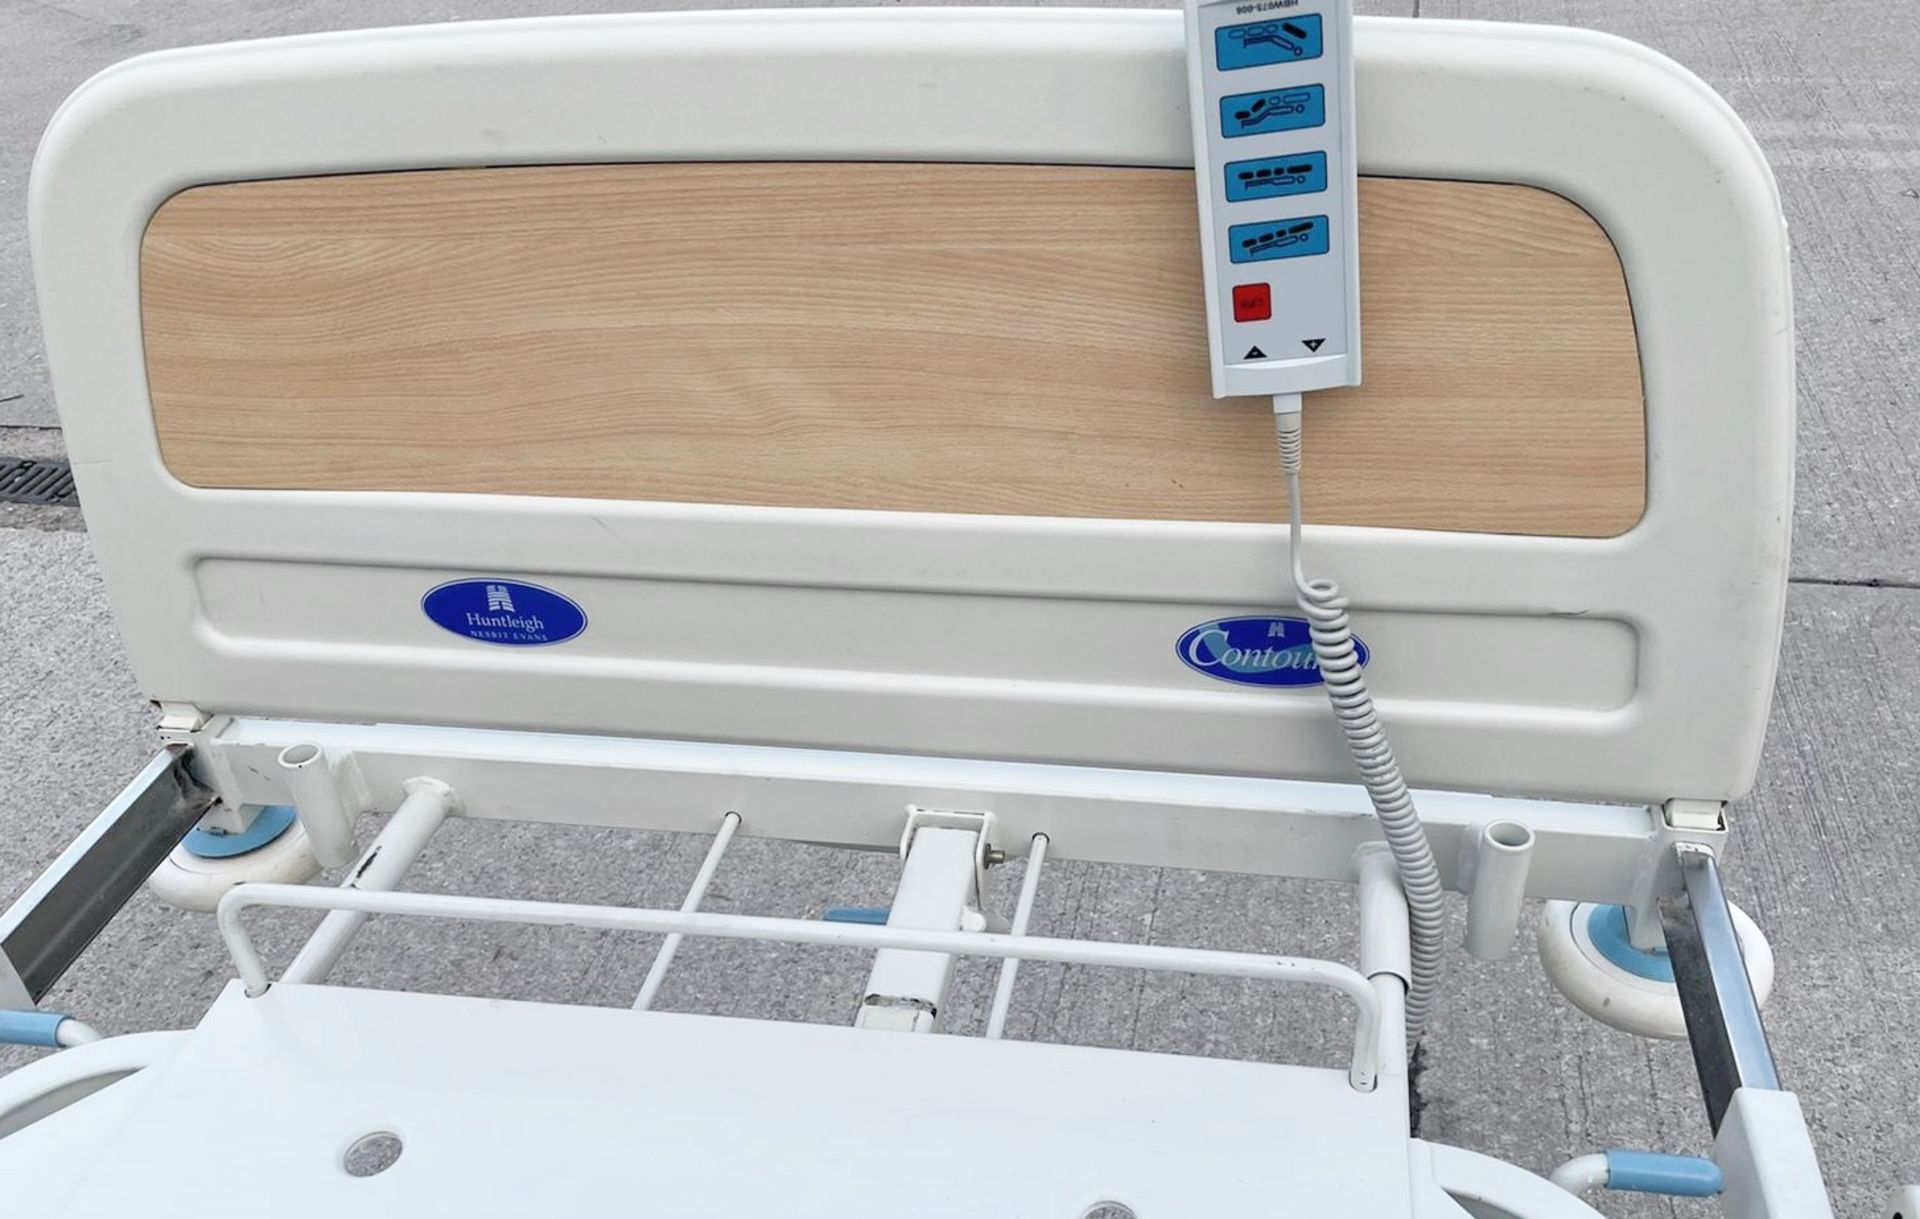 1 x Huntleigh CONTOURA Electric Hospital Bed - Features Rise/Fall 3-Way Profiling, Side Rails, - Image 5 of 5